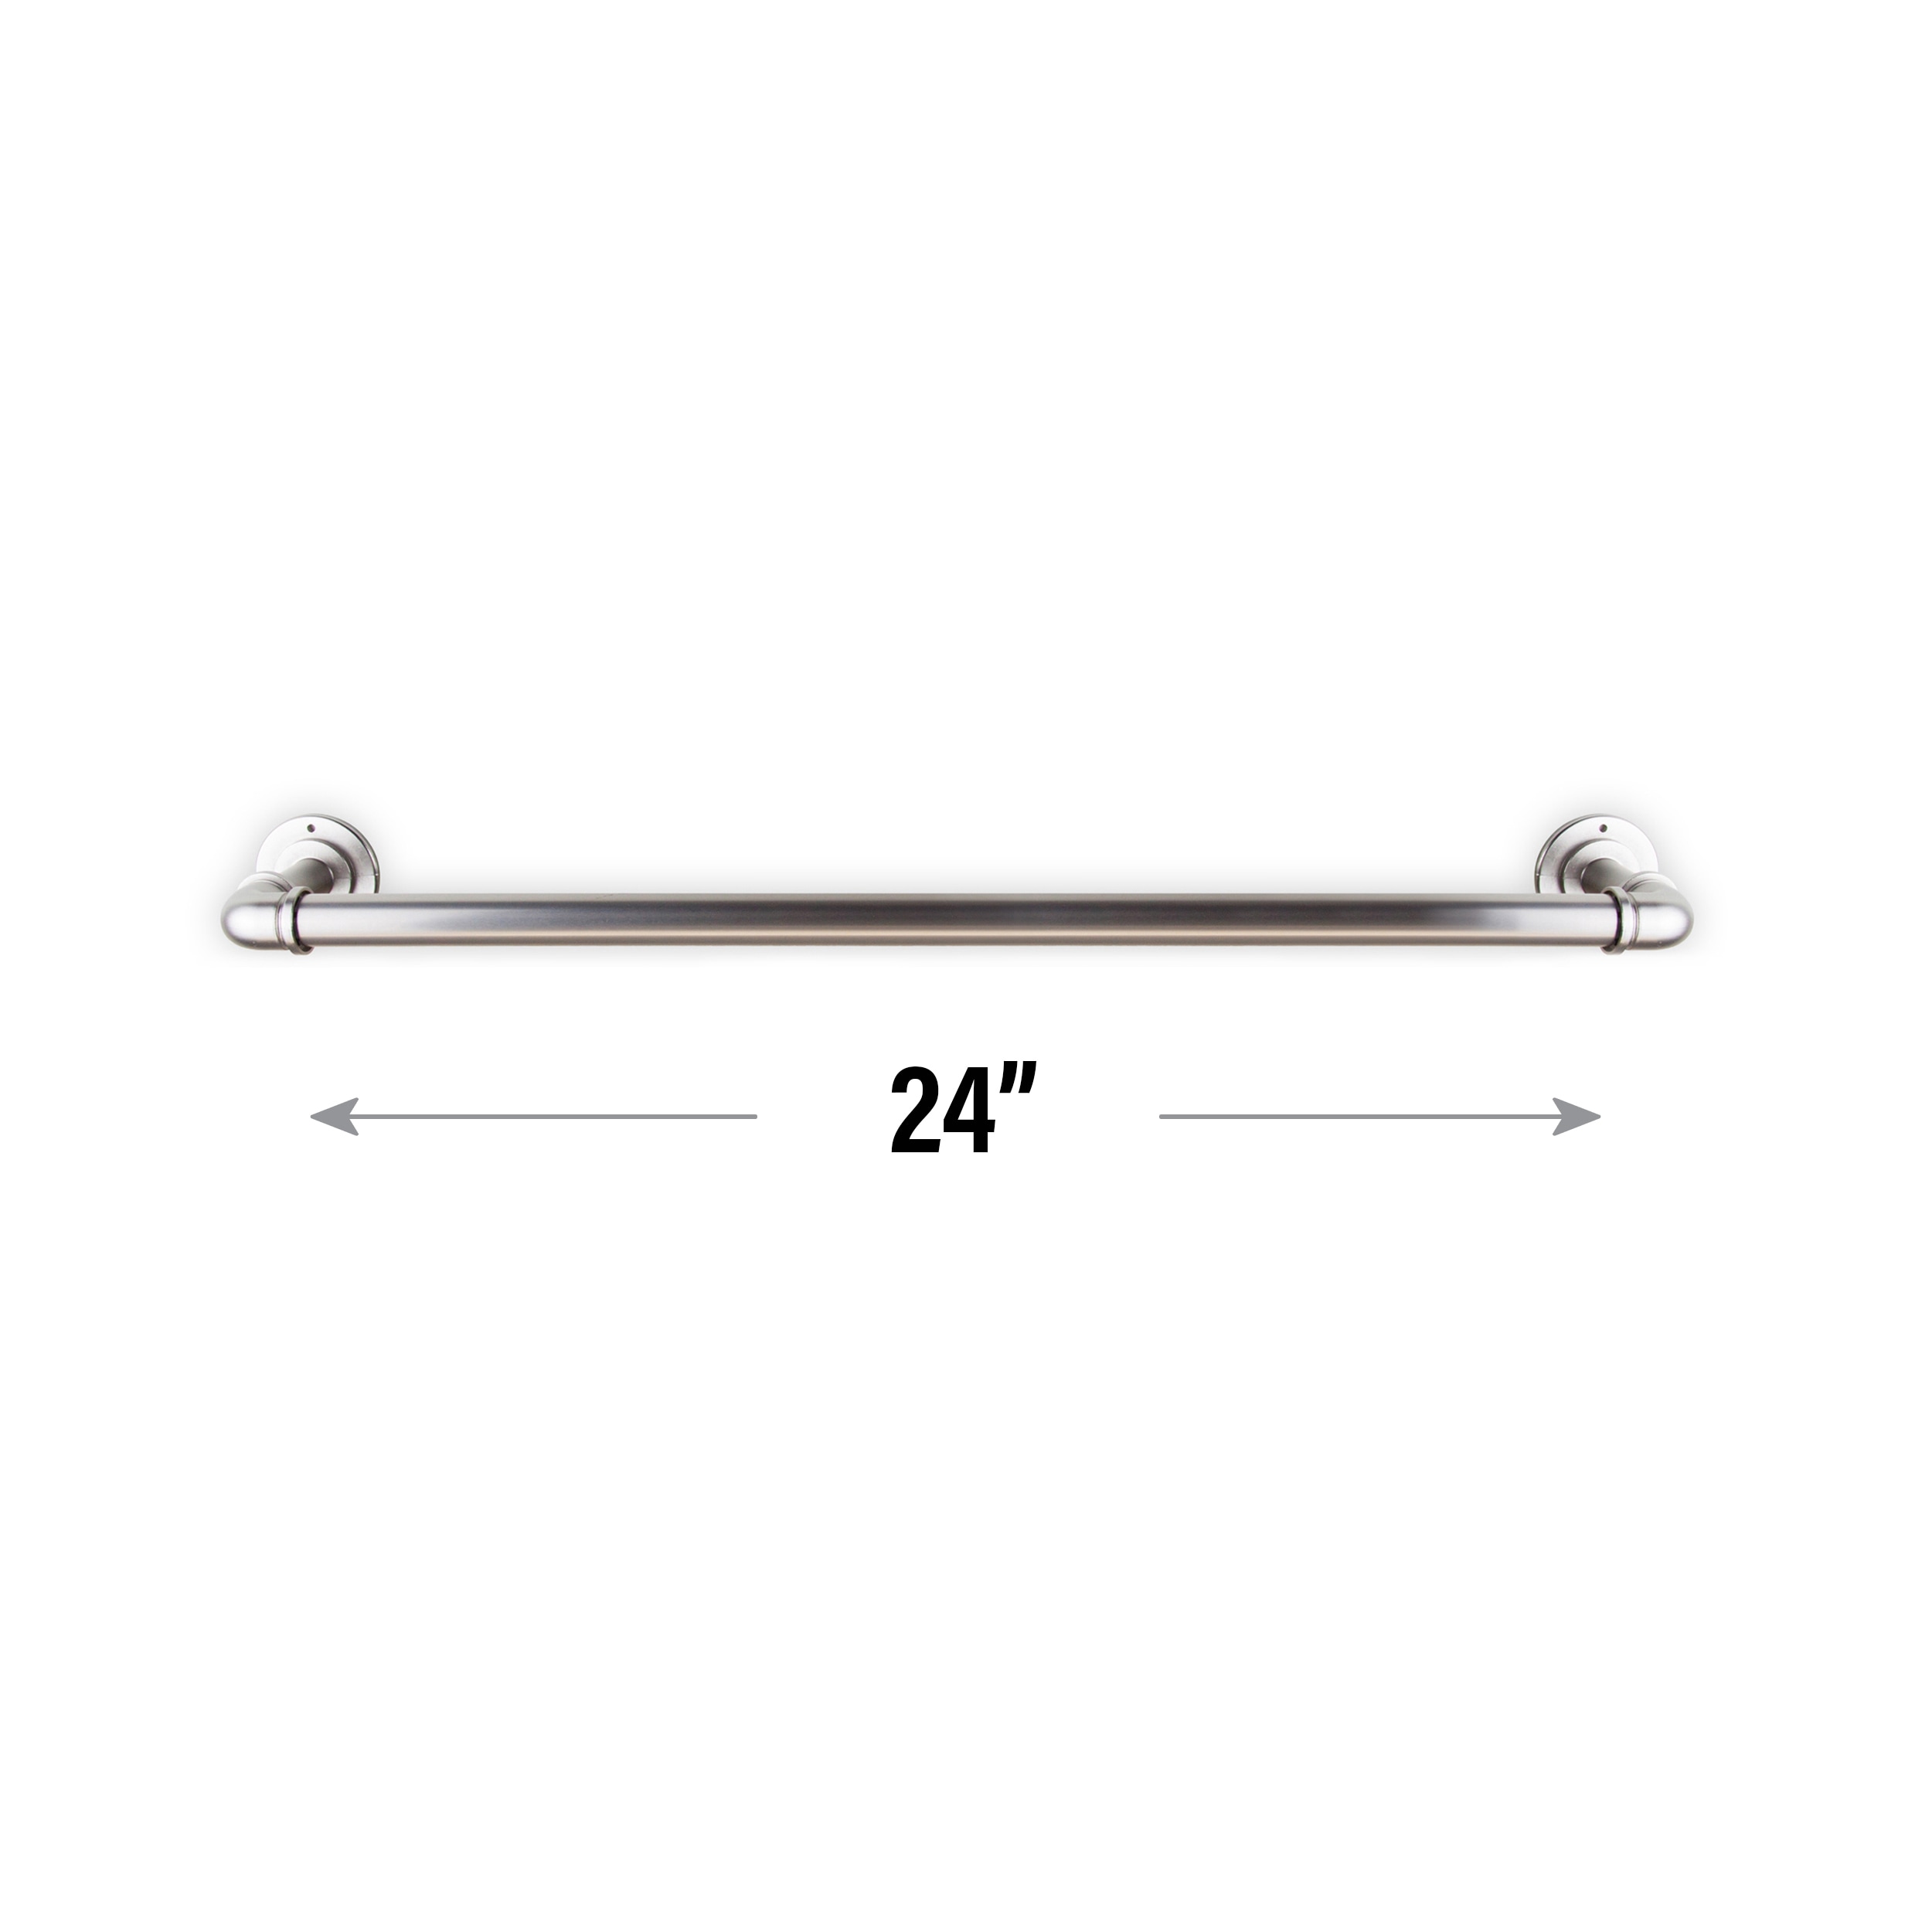 Hospitality Extensions 24 in. Train Rack Shelf with 3 Hooks Bath Hardware  Accessory in Brushed Nickel